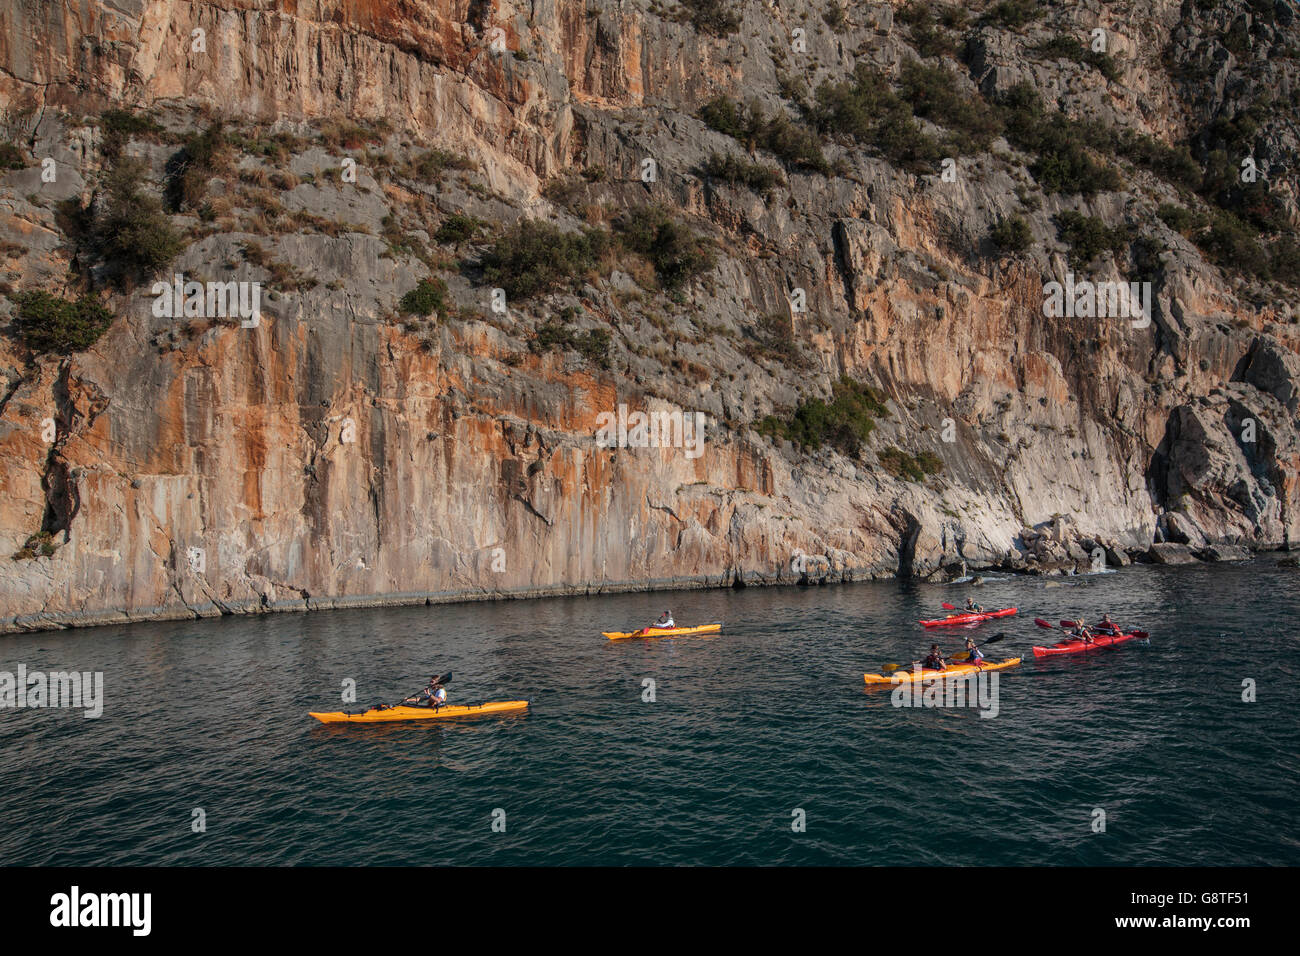 Group of people kayaking next to rock formation Stock Photo